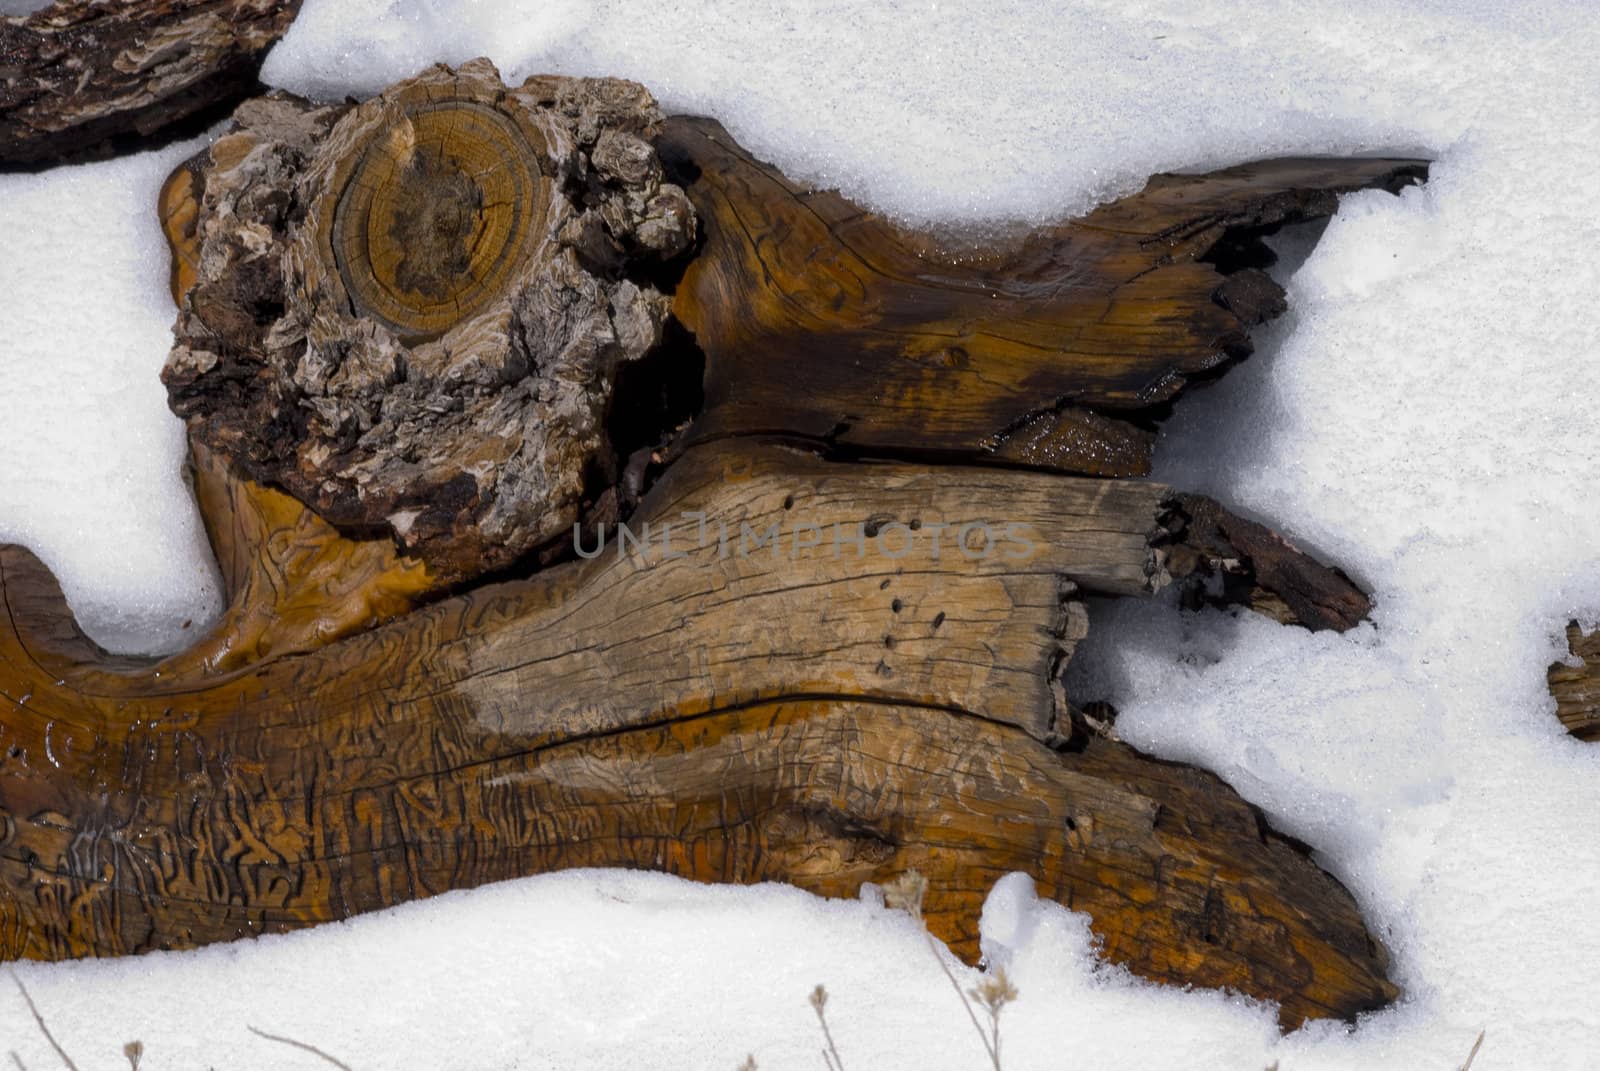 Log is exposed from deep under snow